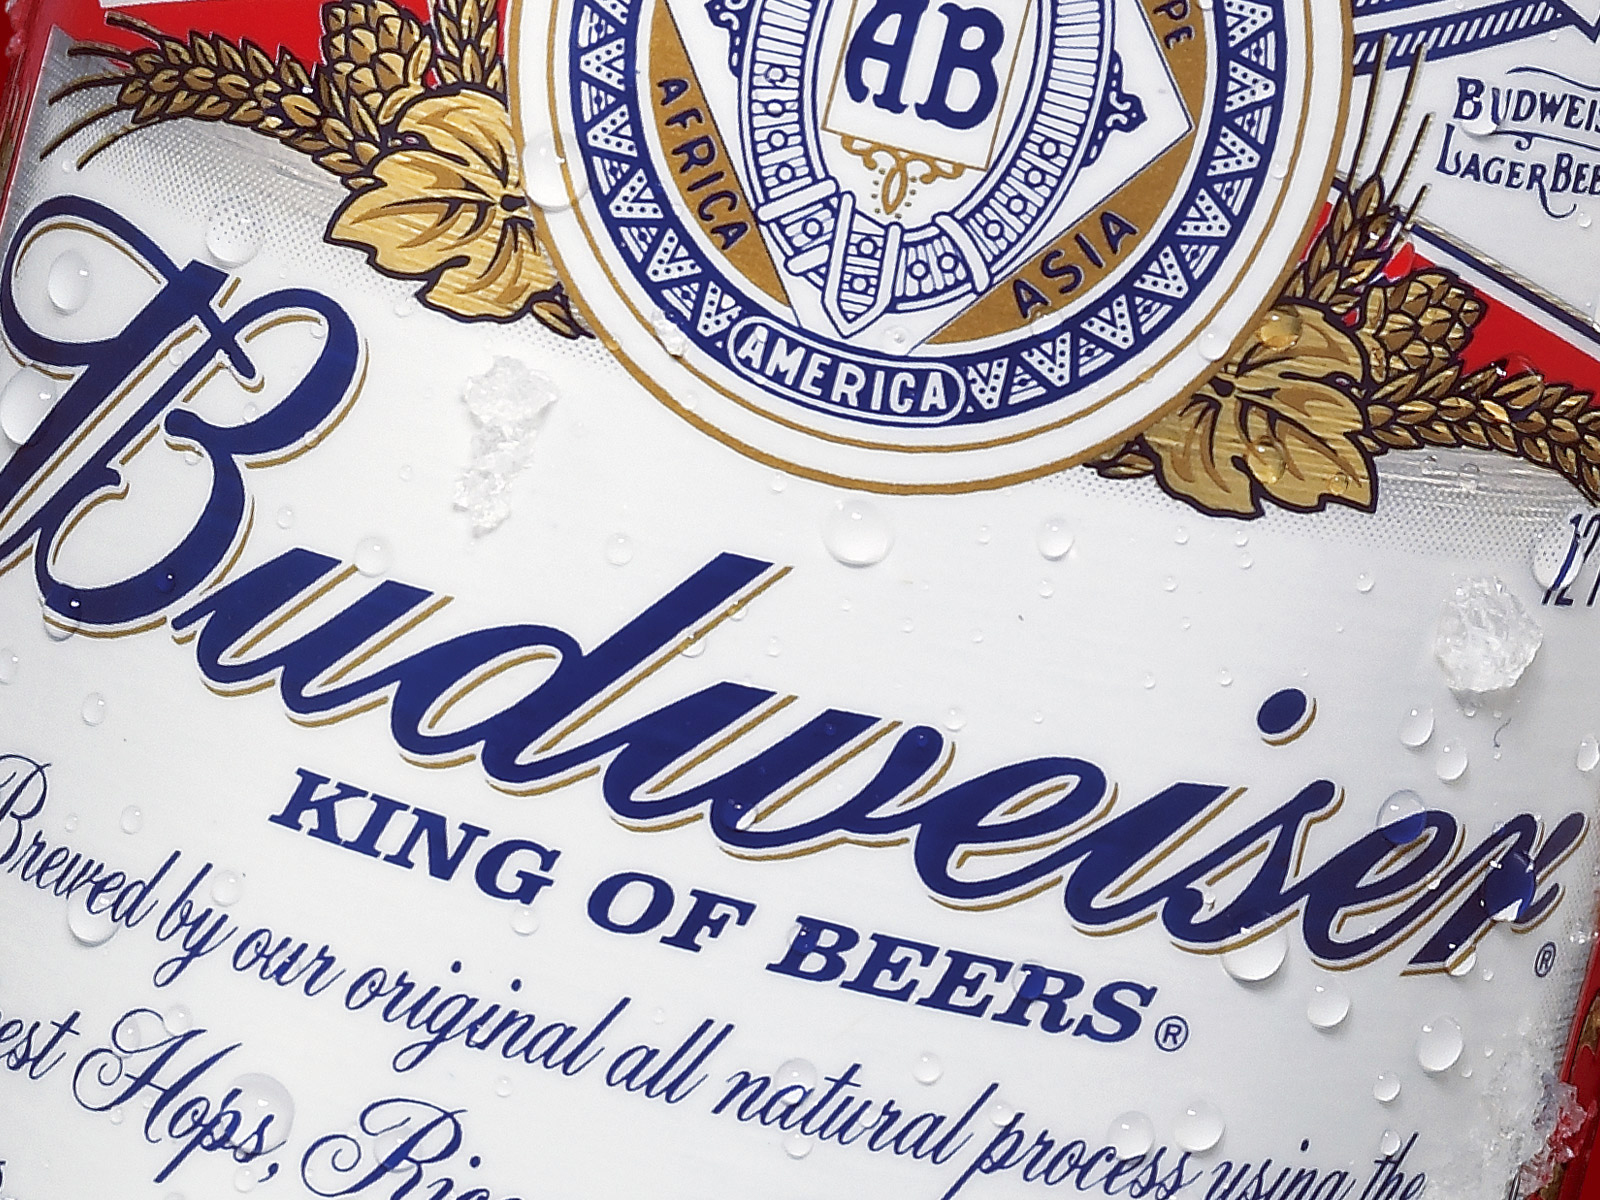 Bud Label Causes a Furor | Time